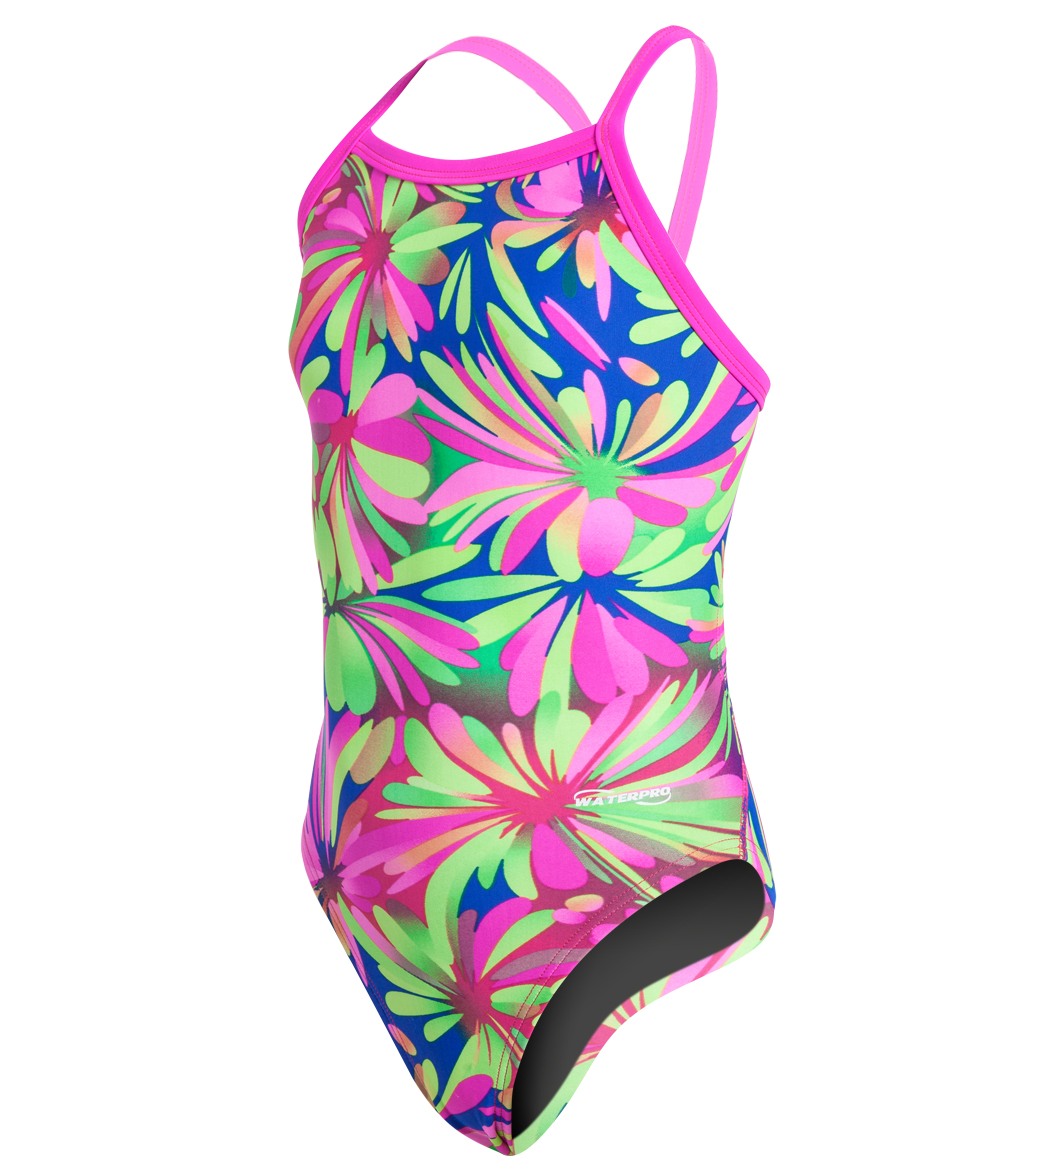 Waterpro Pom Poms Youth One Piece Swimsuit at SwimOutlet.com